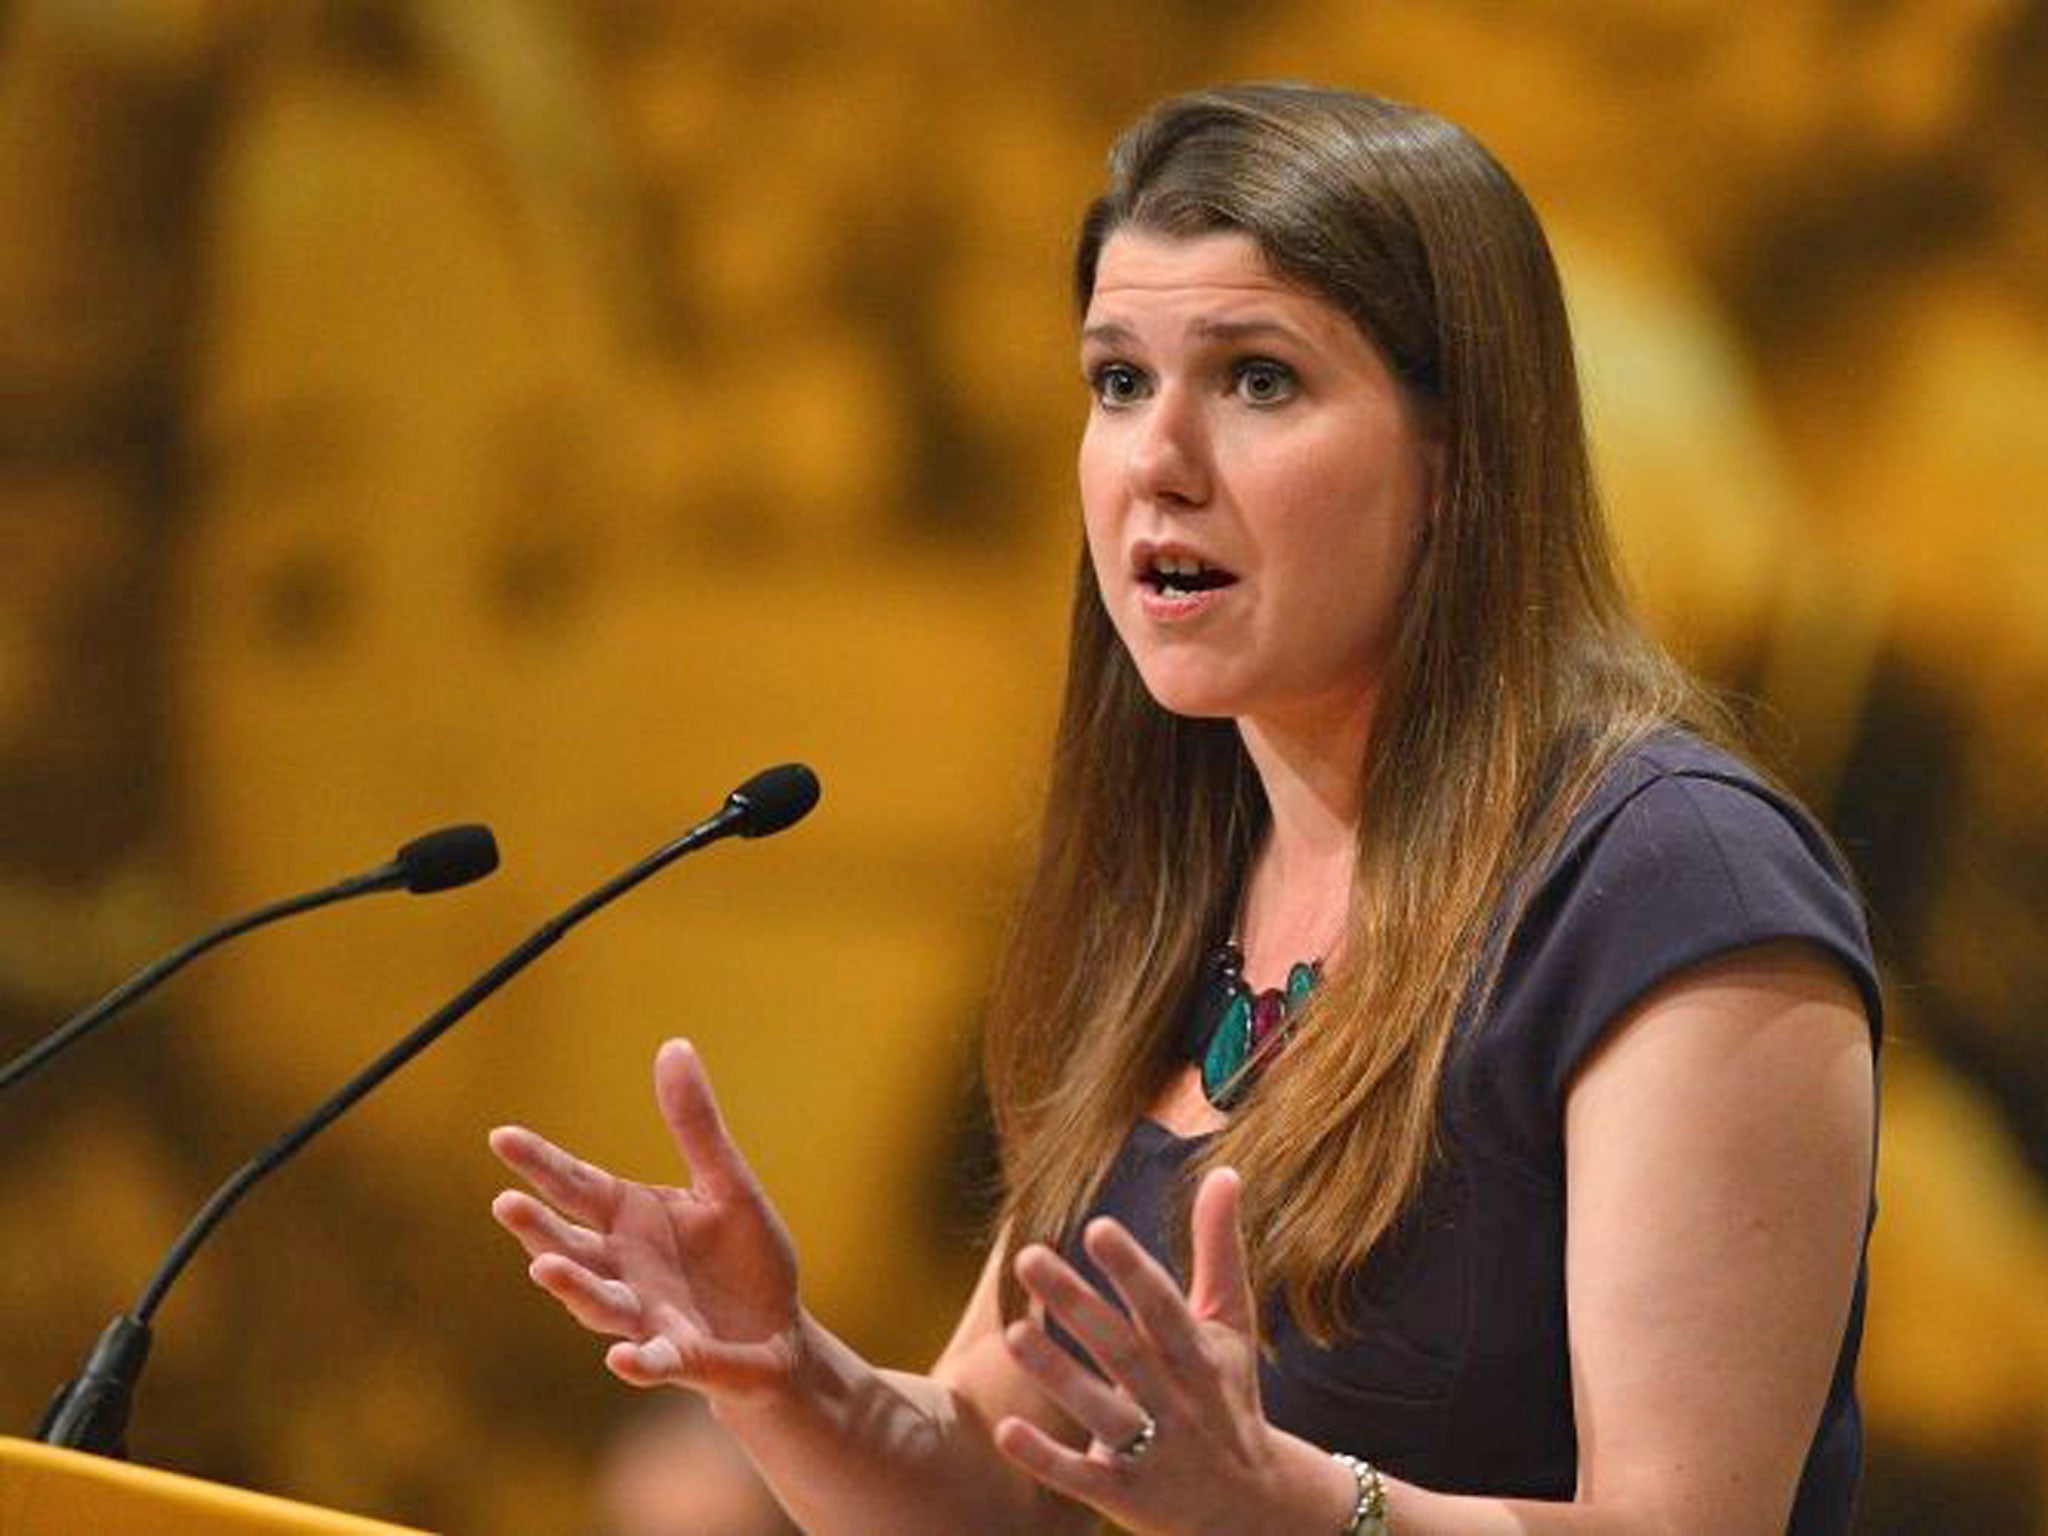 Jo Swinson, minister for women, says she ‘took action’ over claims